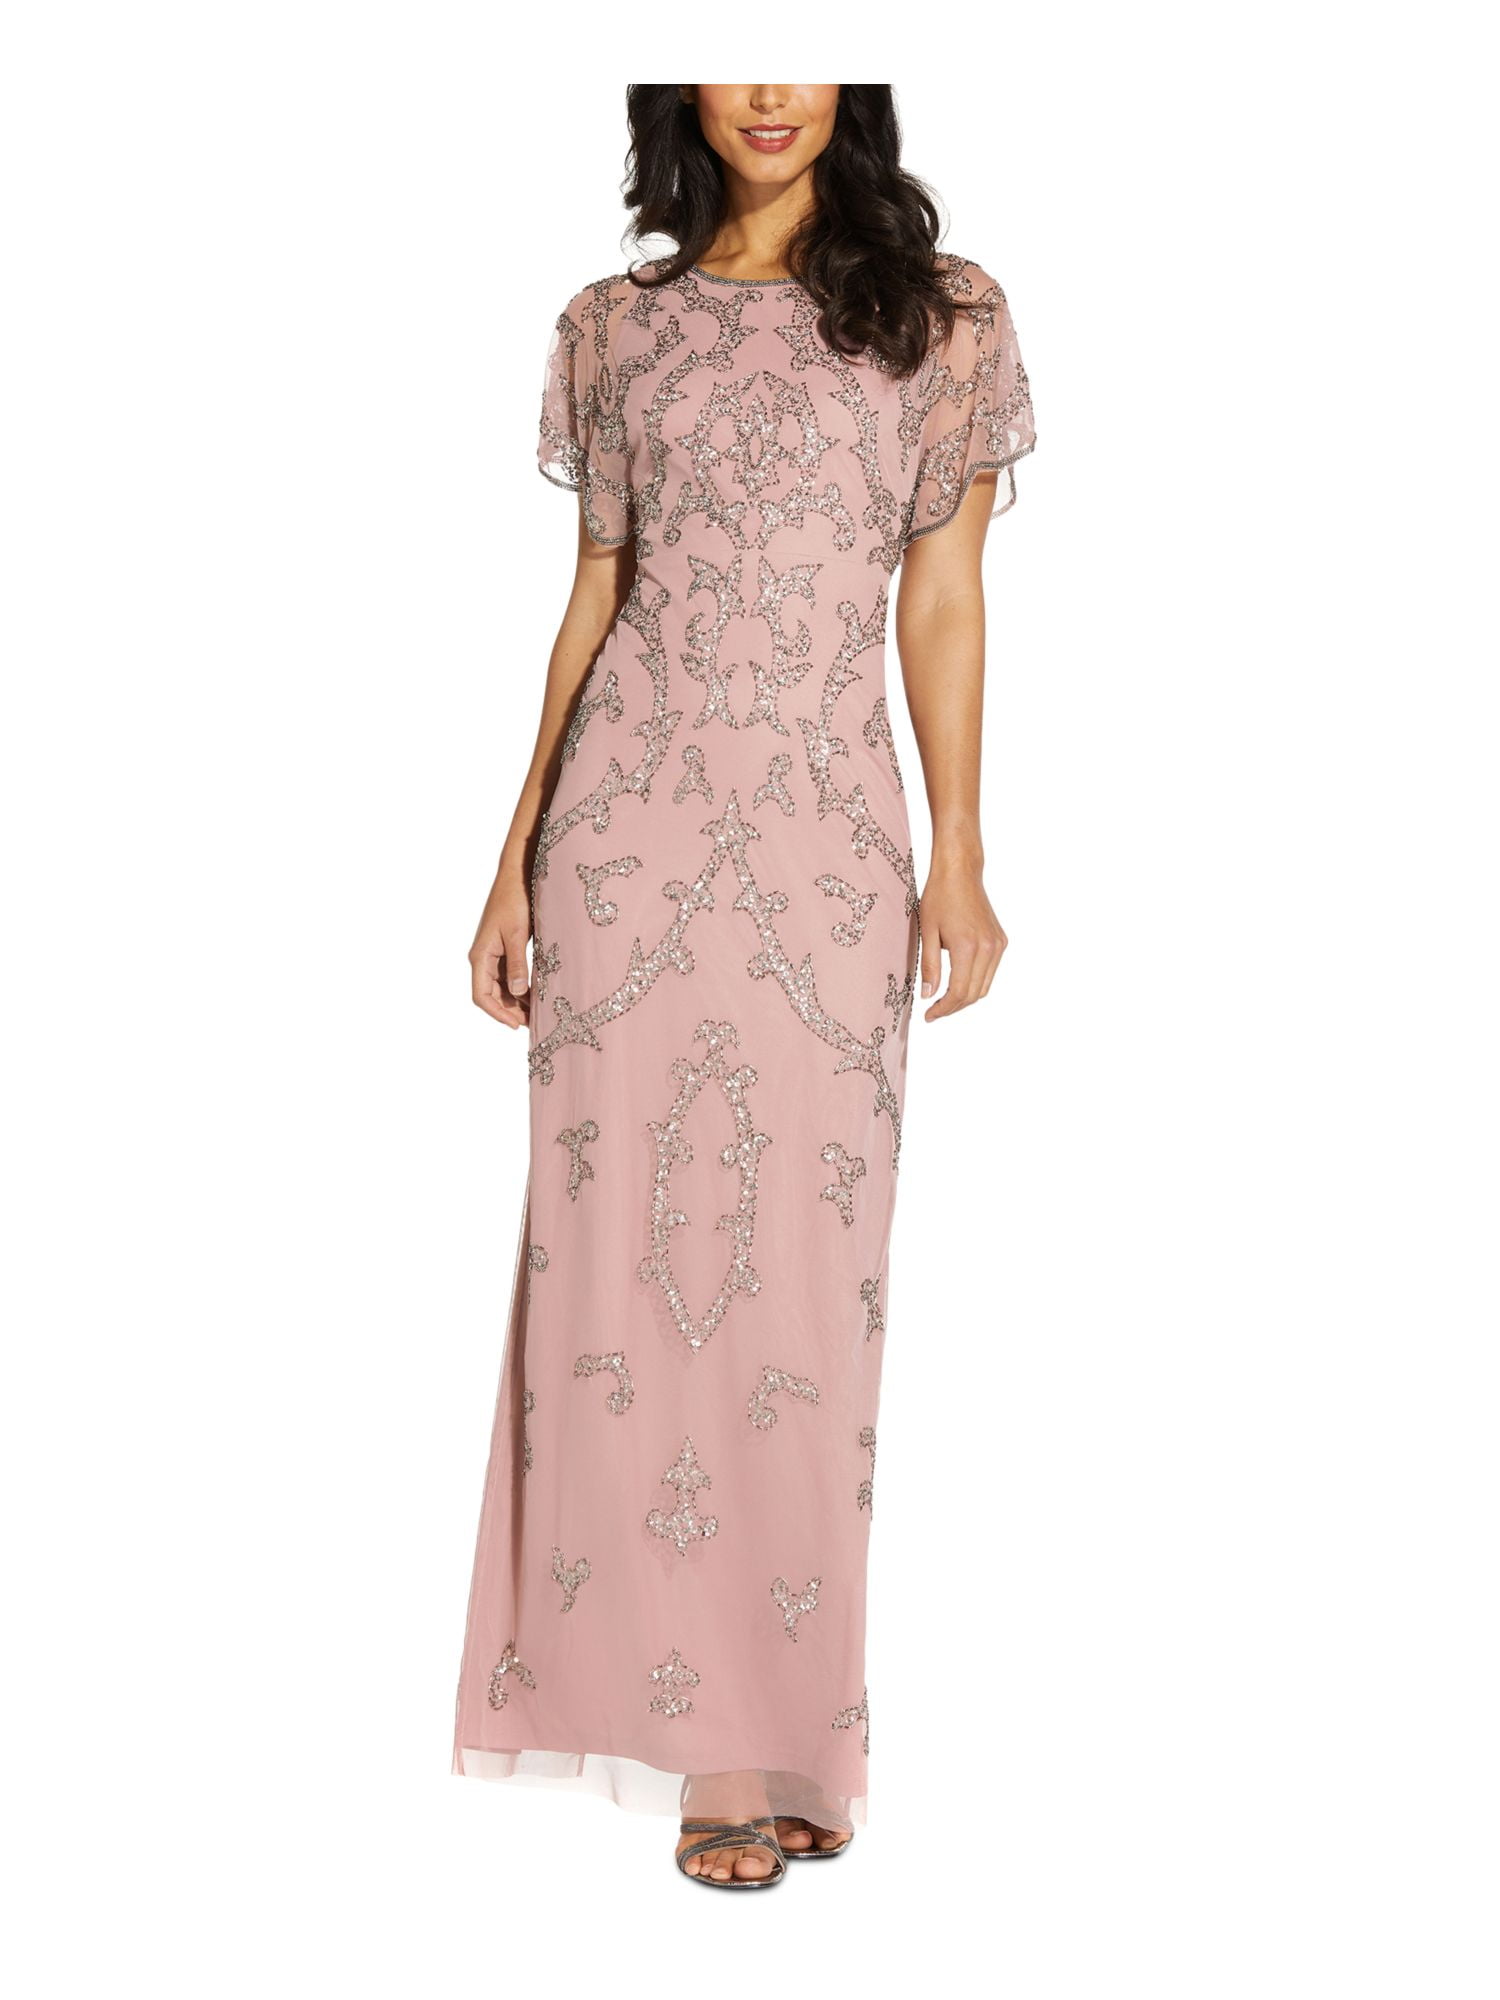 Hand Beaded Short Sleeve Floral Godet Gown In Night Plum | Adrianna Papell